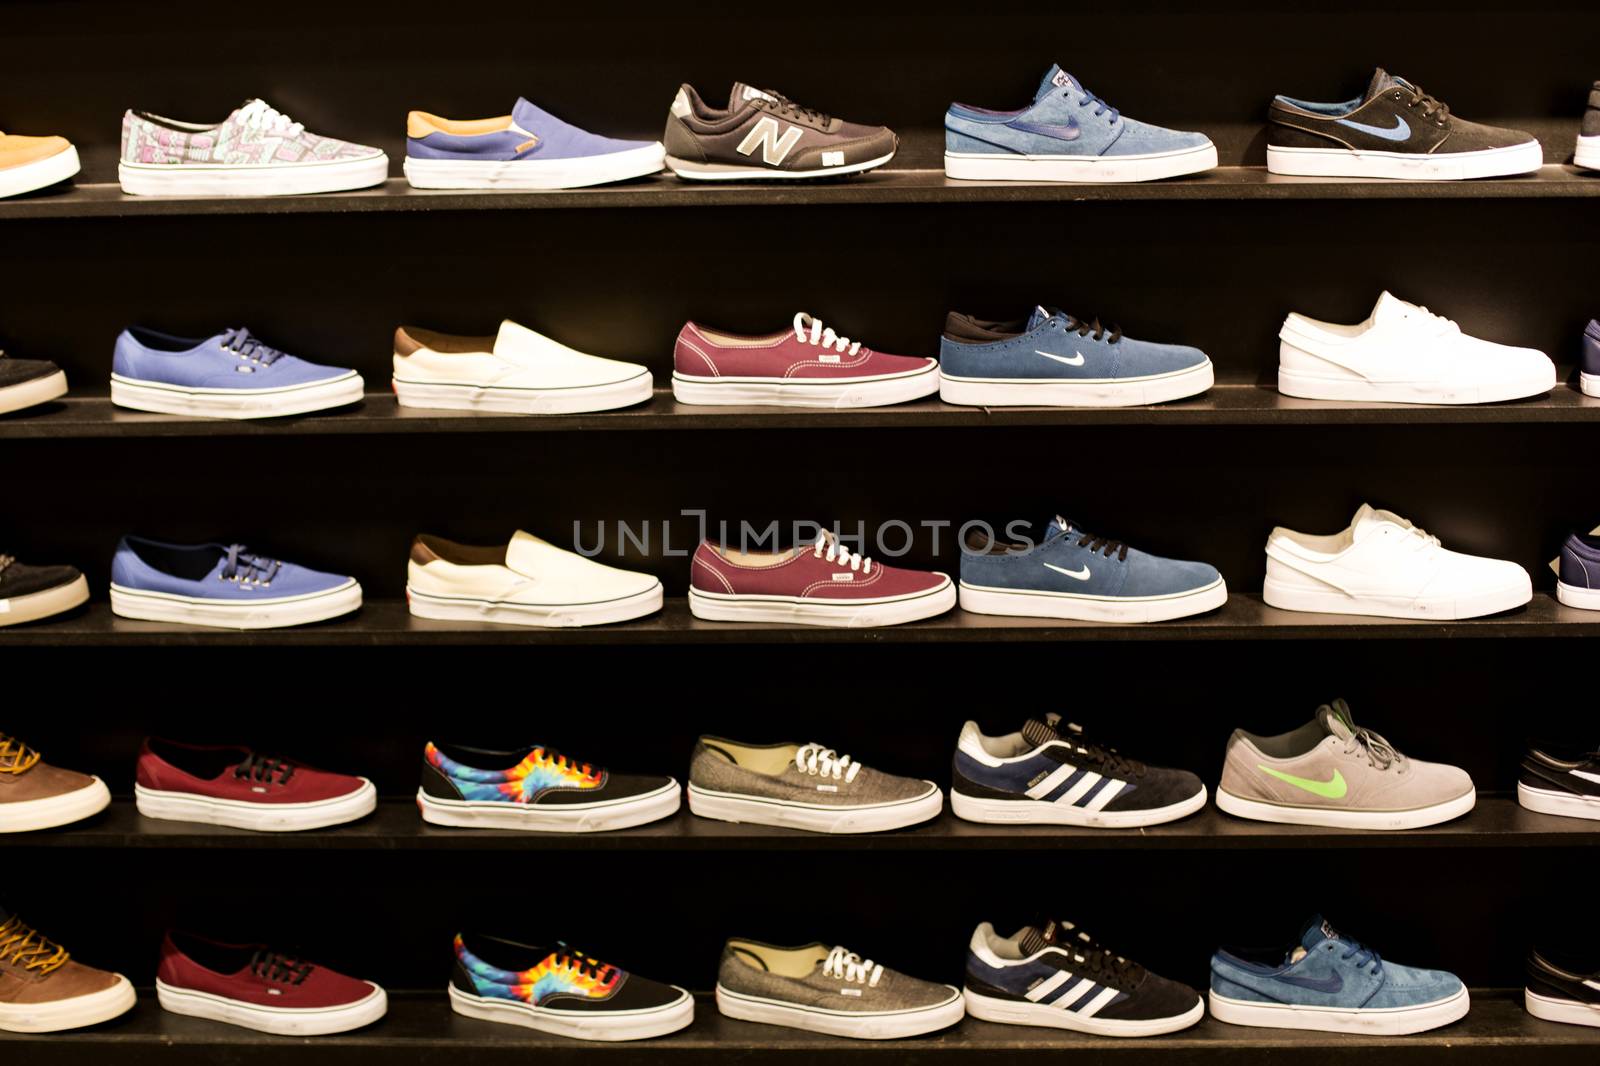 Selection of Colourful Trainers in a Shop Display by Whiteboxmedia